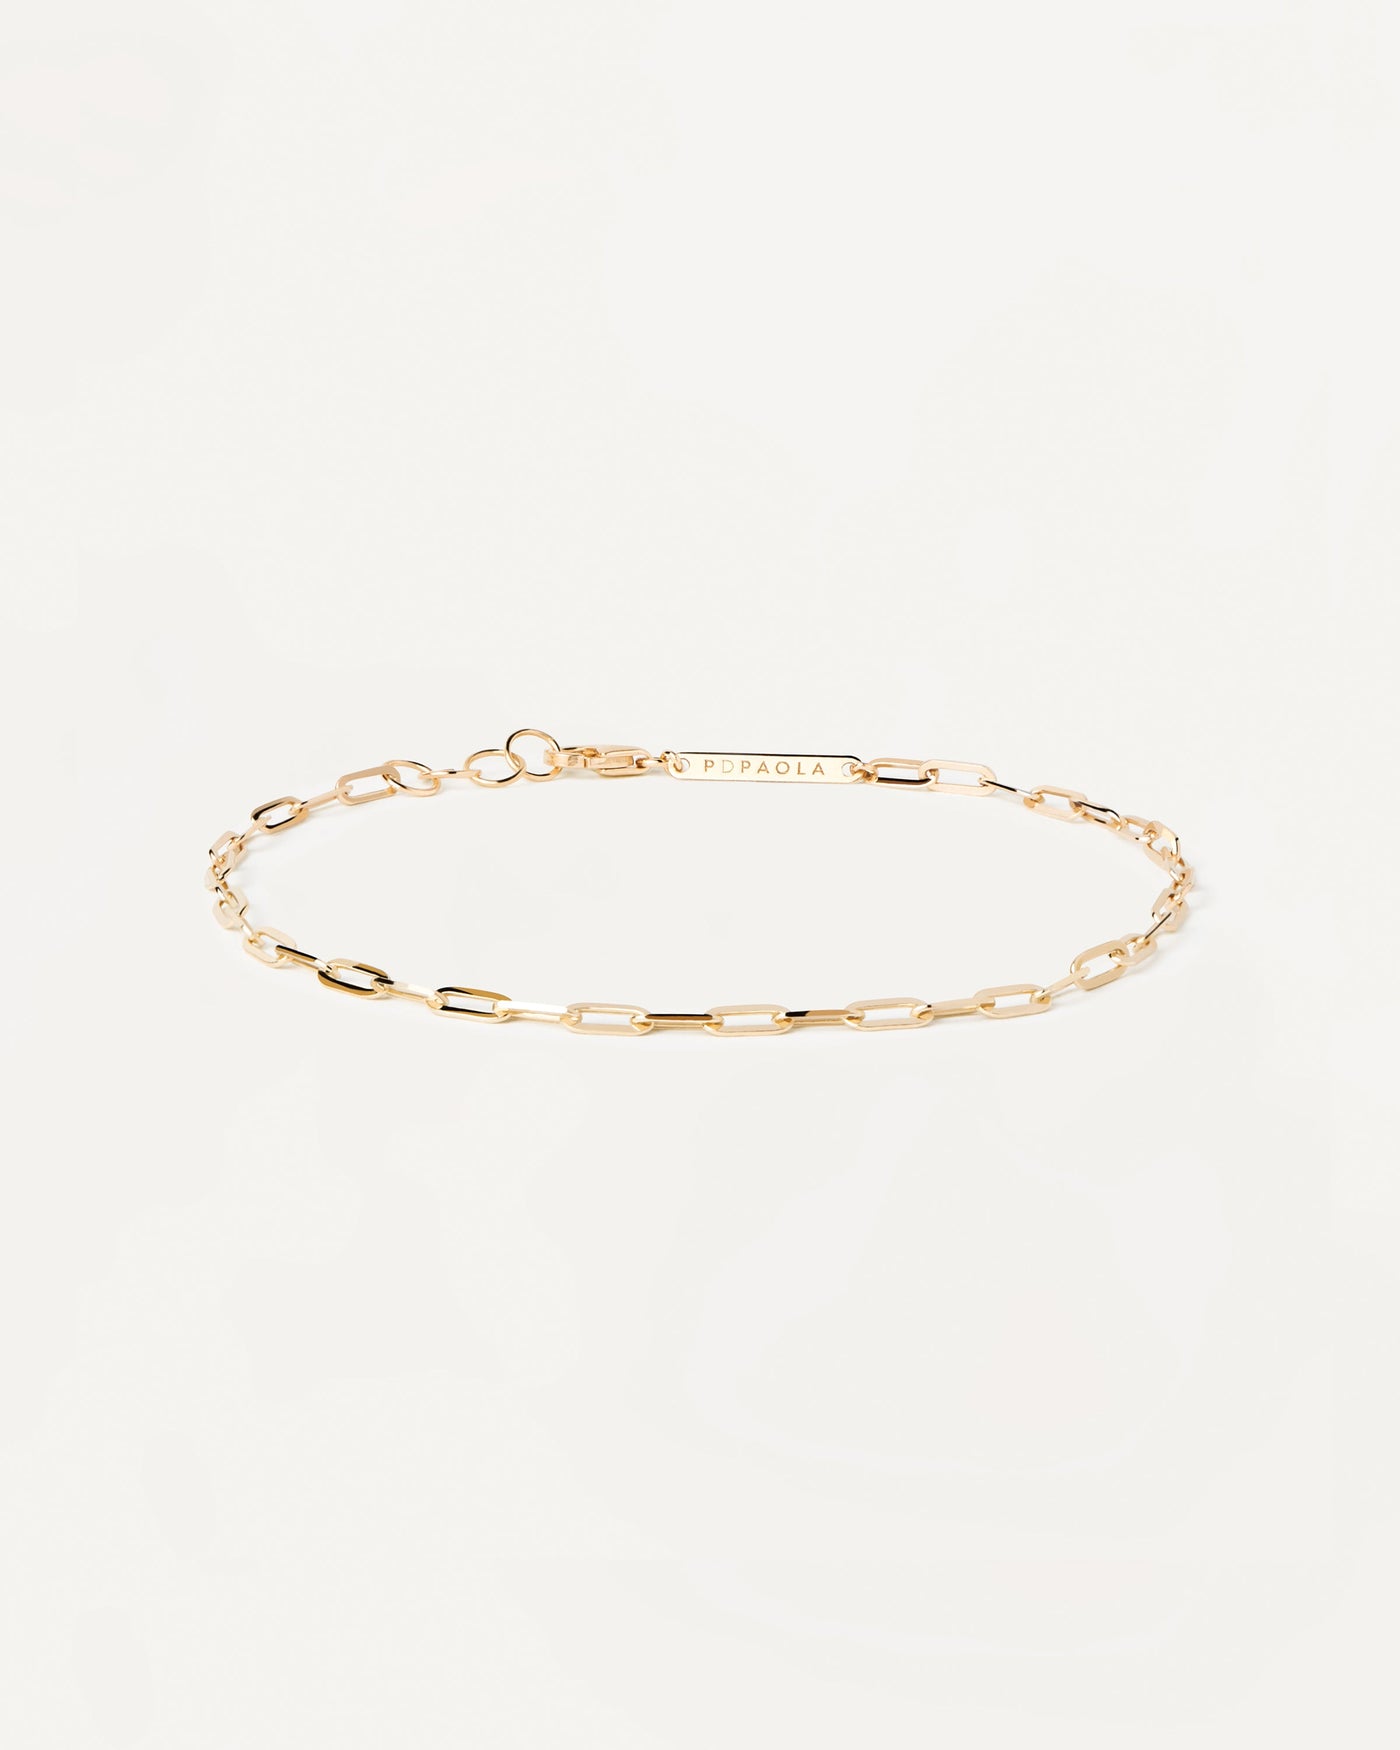 2023 Selection | Gold Cable Chain Bracelet. 18K solid yellow gold chain bracelet with cable links. Get the latest arrival from PDPAOLA. Place your order safely and get this Best Seller. Free Shipping.